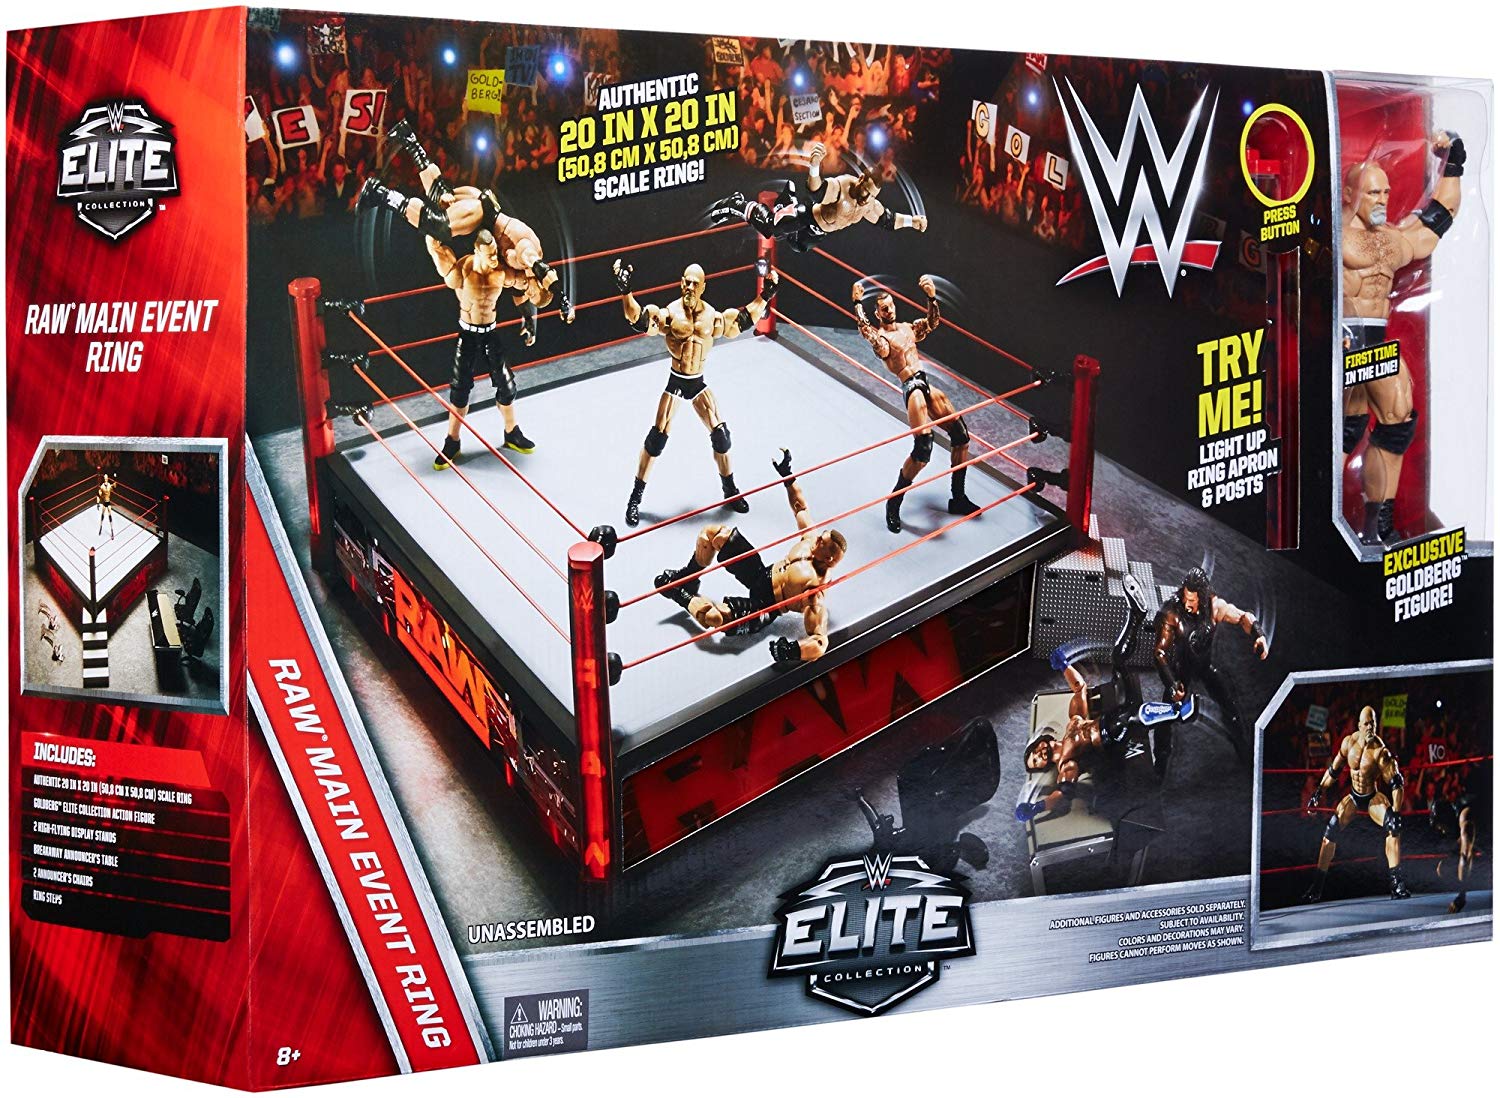 WWE Wrestling Authentic Scale Ring Action Figure Playset Raw